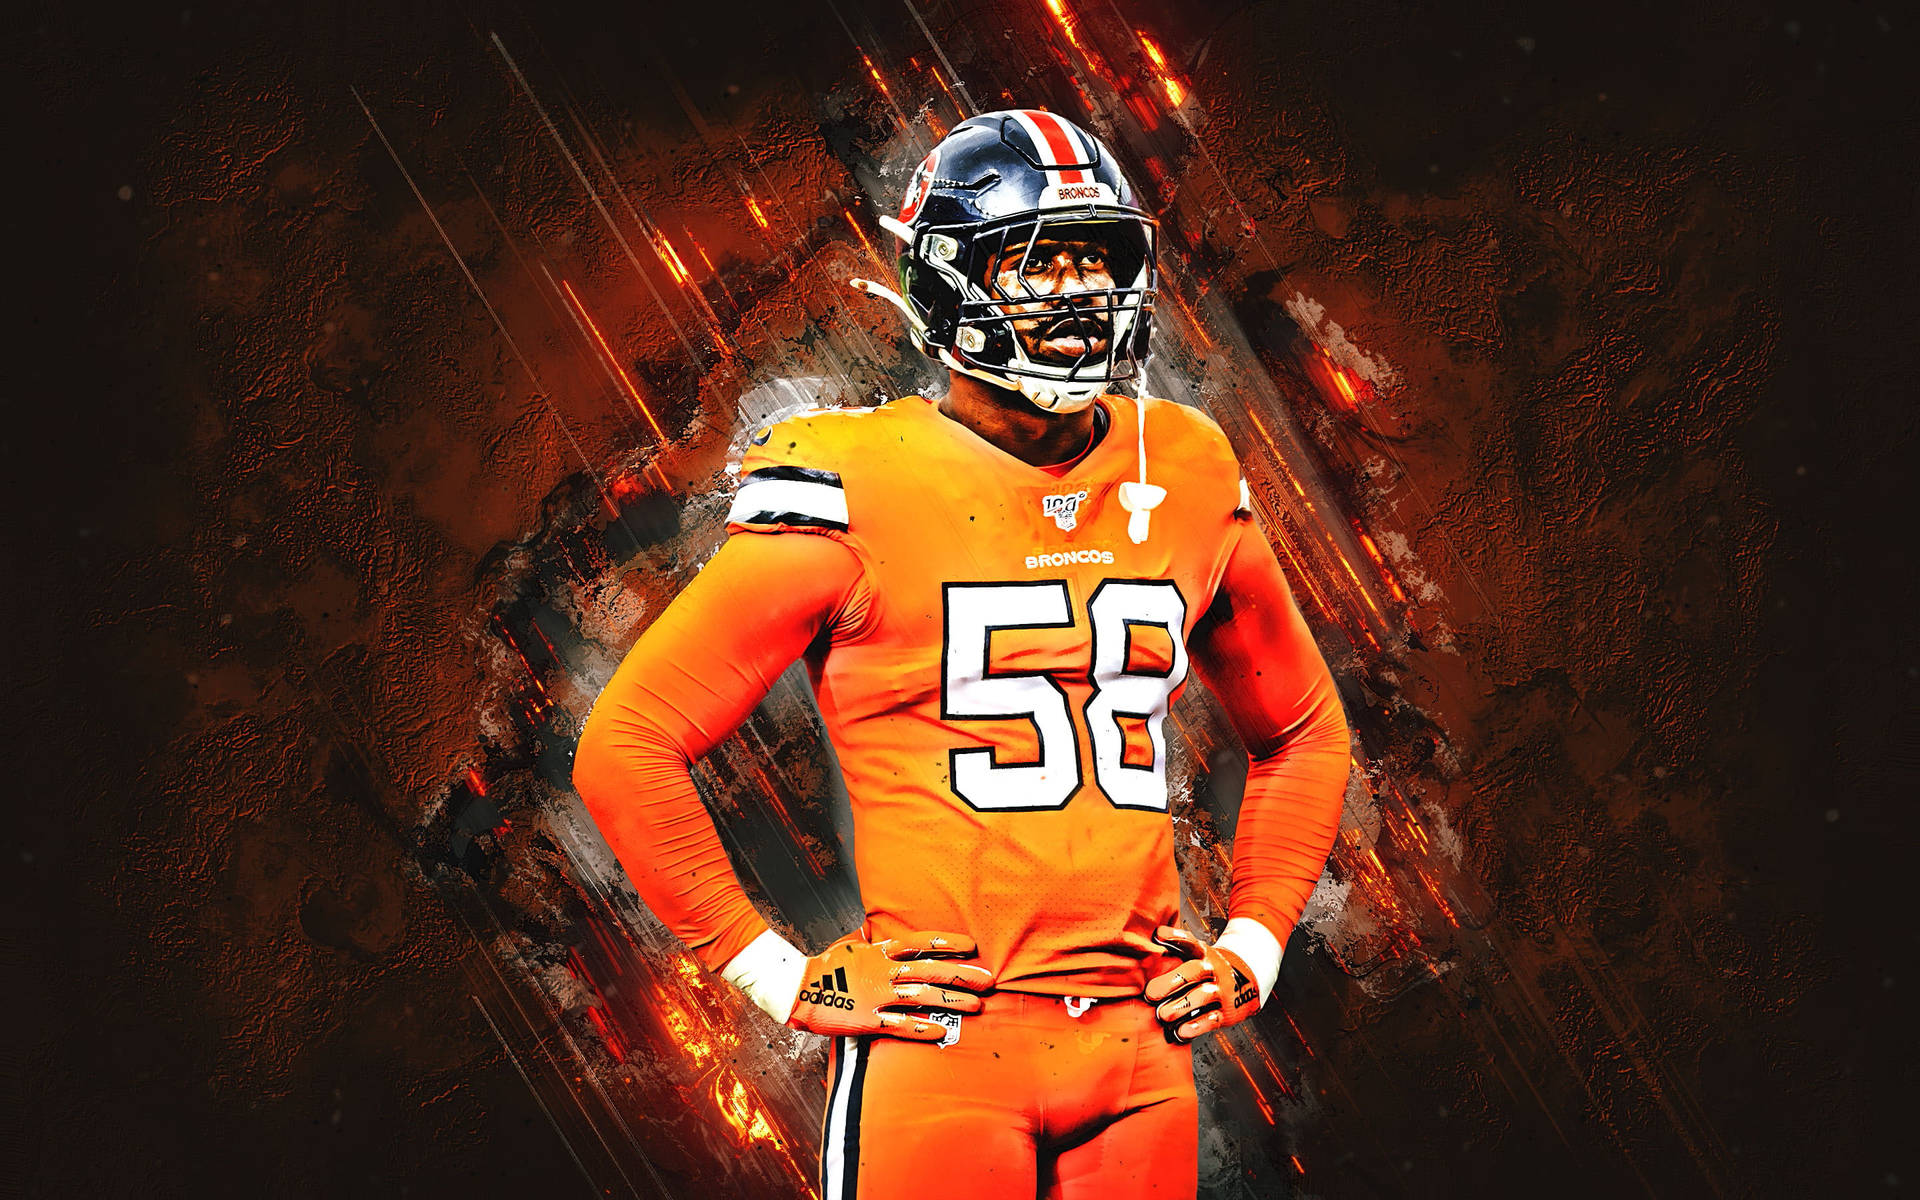 Top 999+ Von Miller Wallpapers Full HD, 4K✅Free to Use